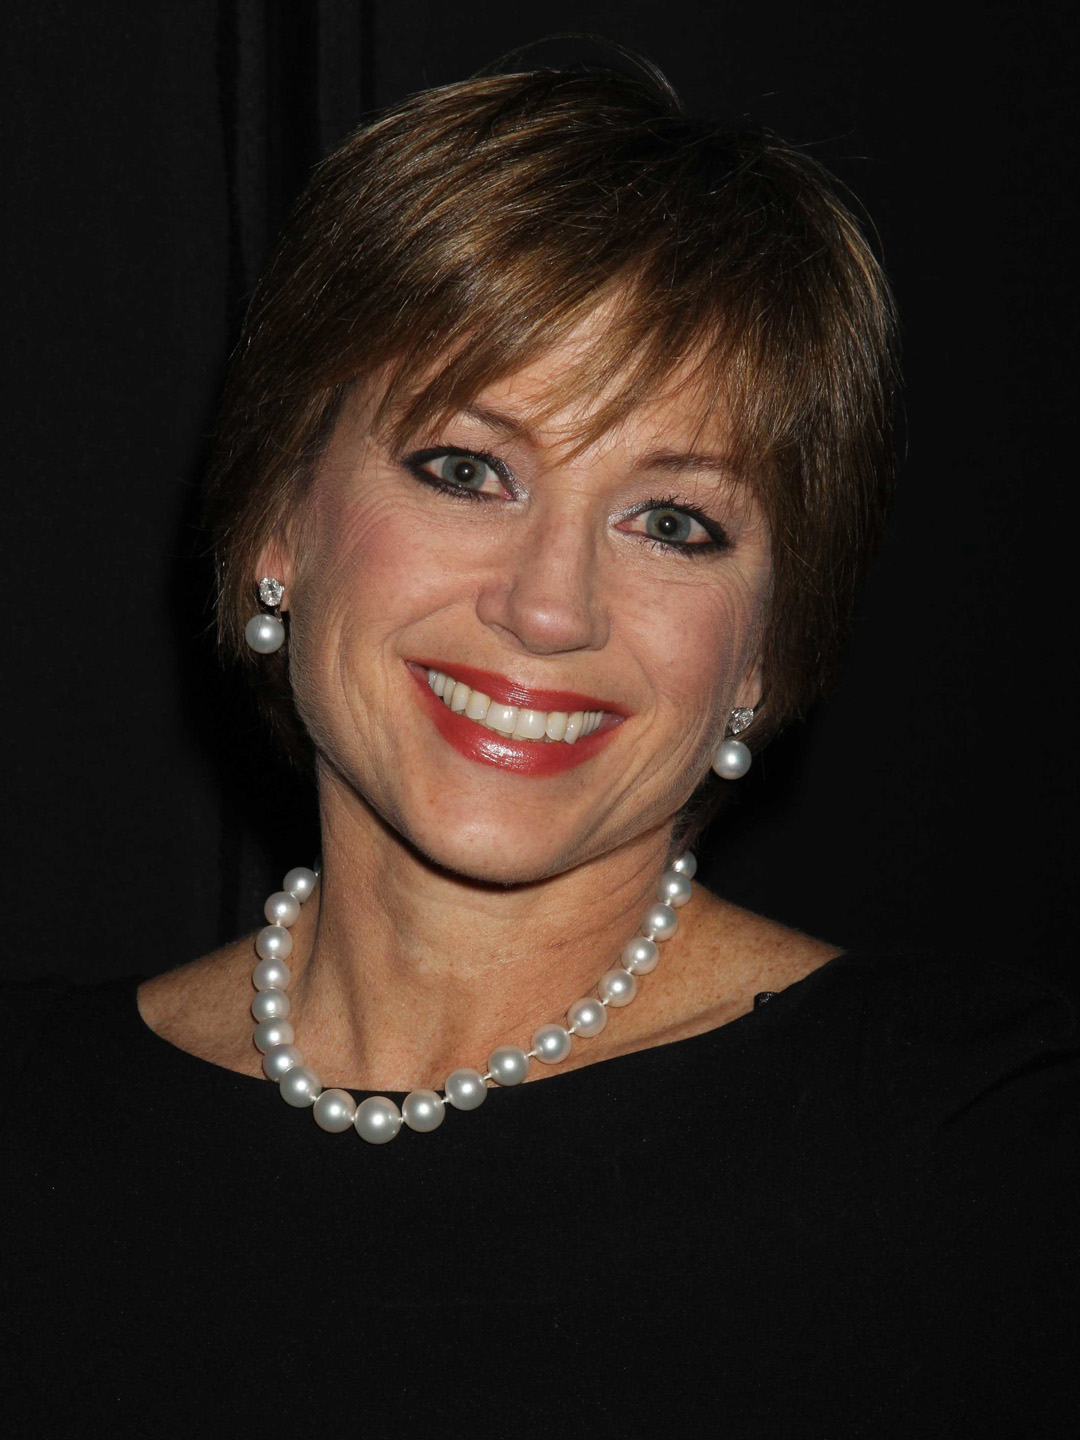 February 13 1976 Dorothy Hamill Won Gold Started a Hairstyle Craze and  Became the Most InDemand Figure Skater  Lifetime